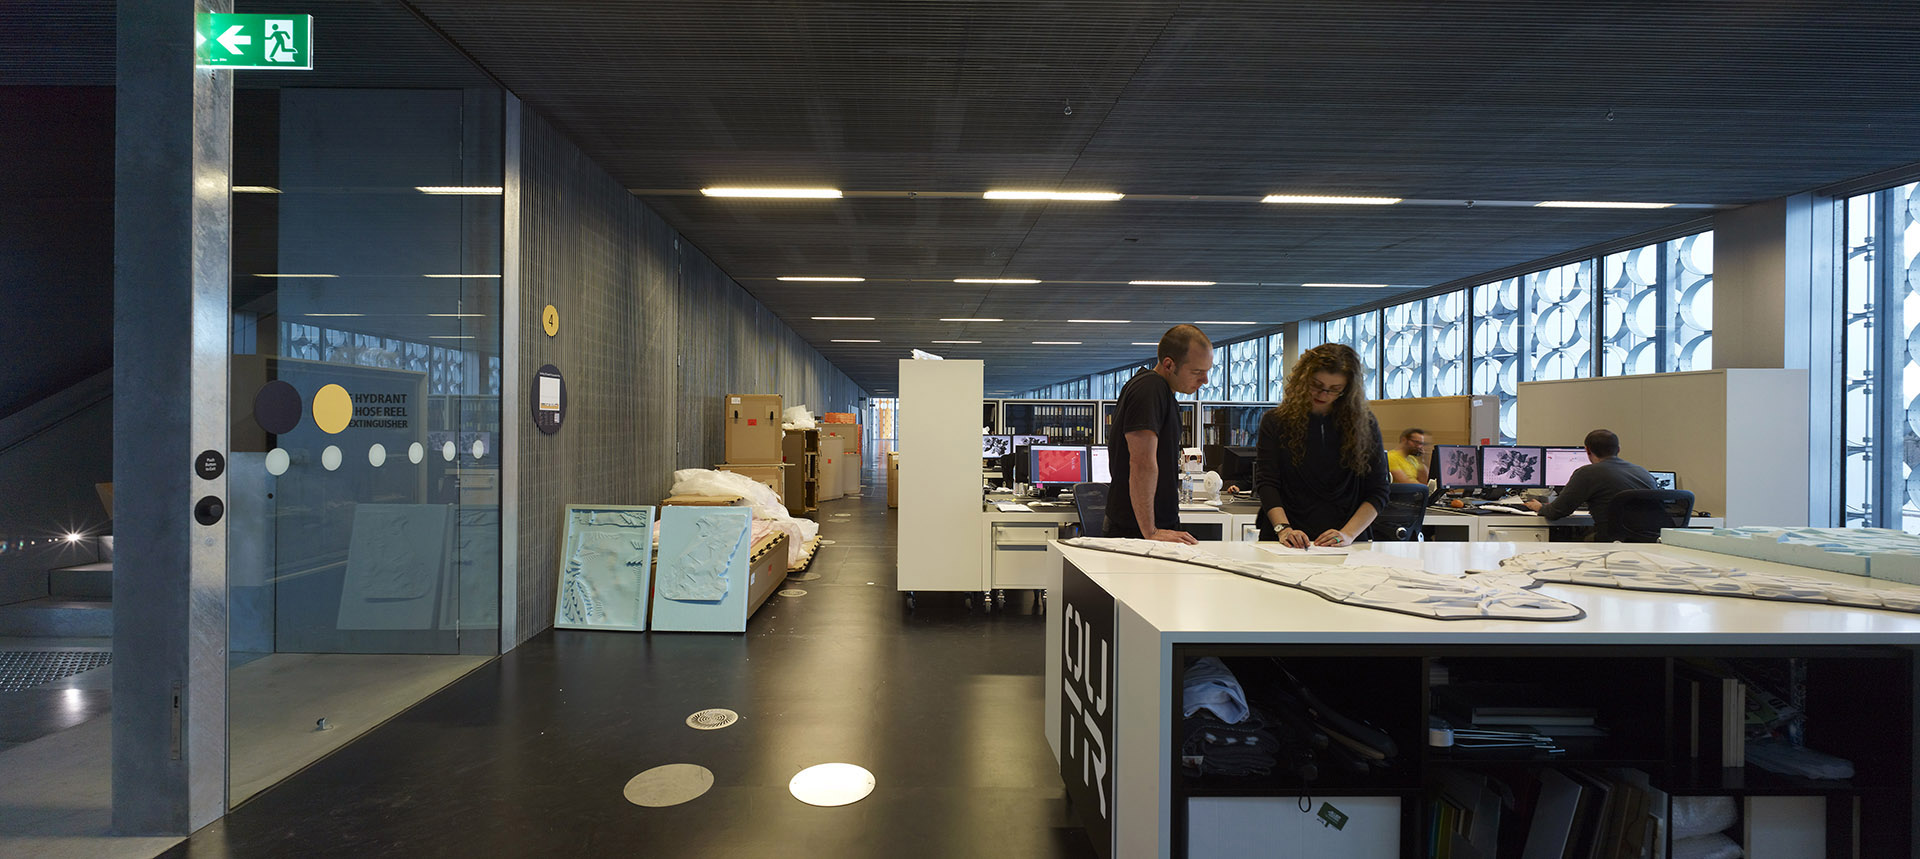 Students in workspace of design hub building